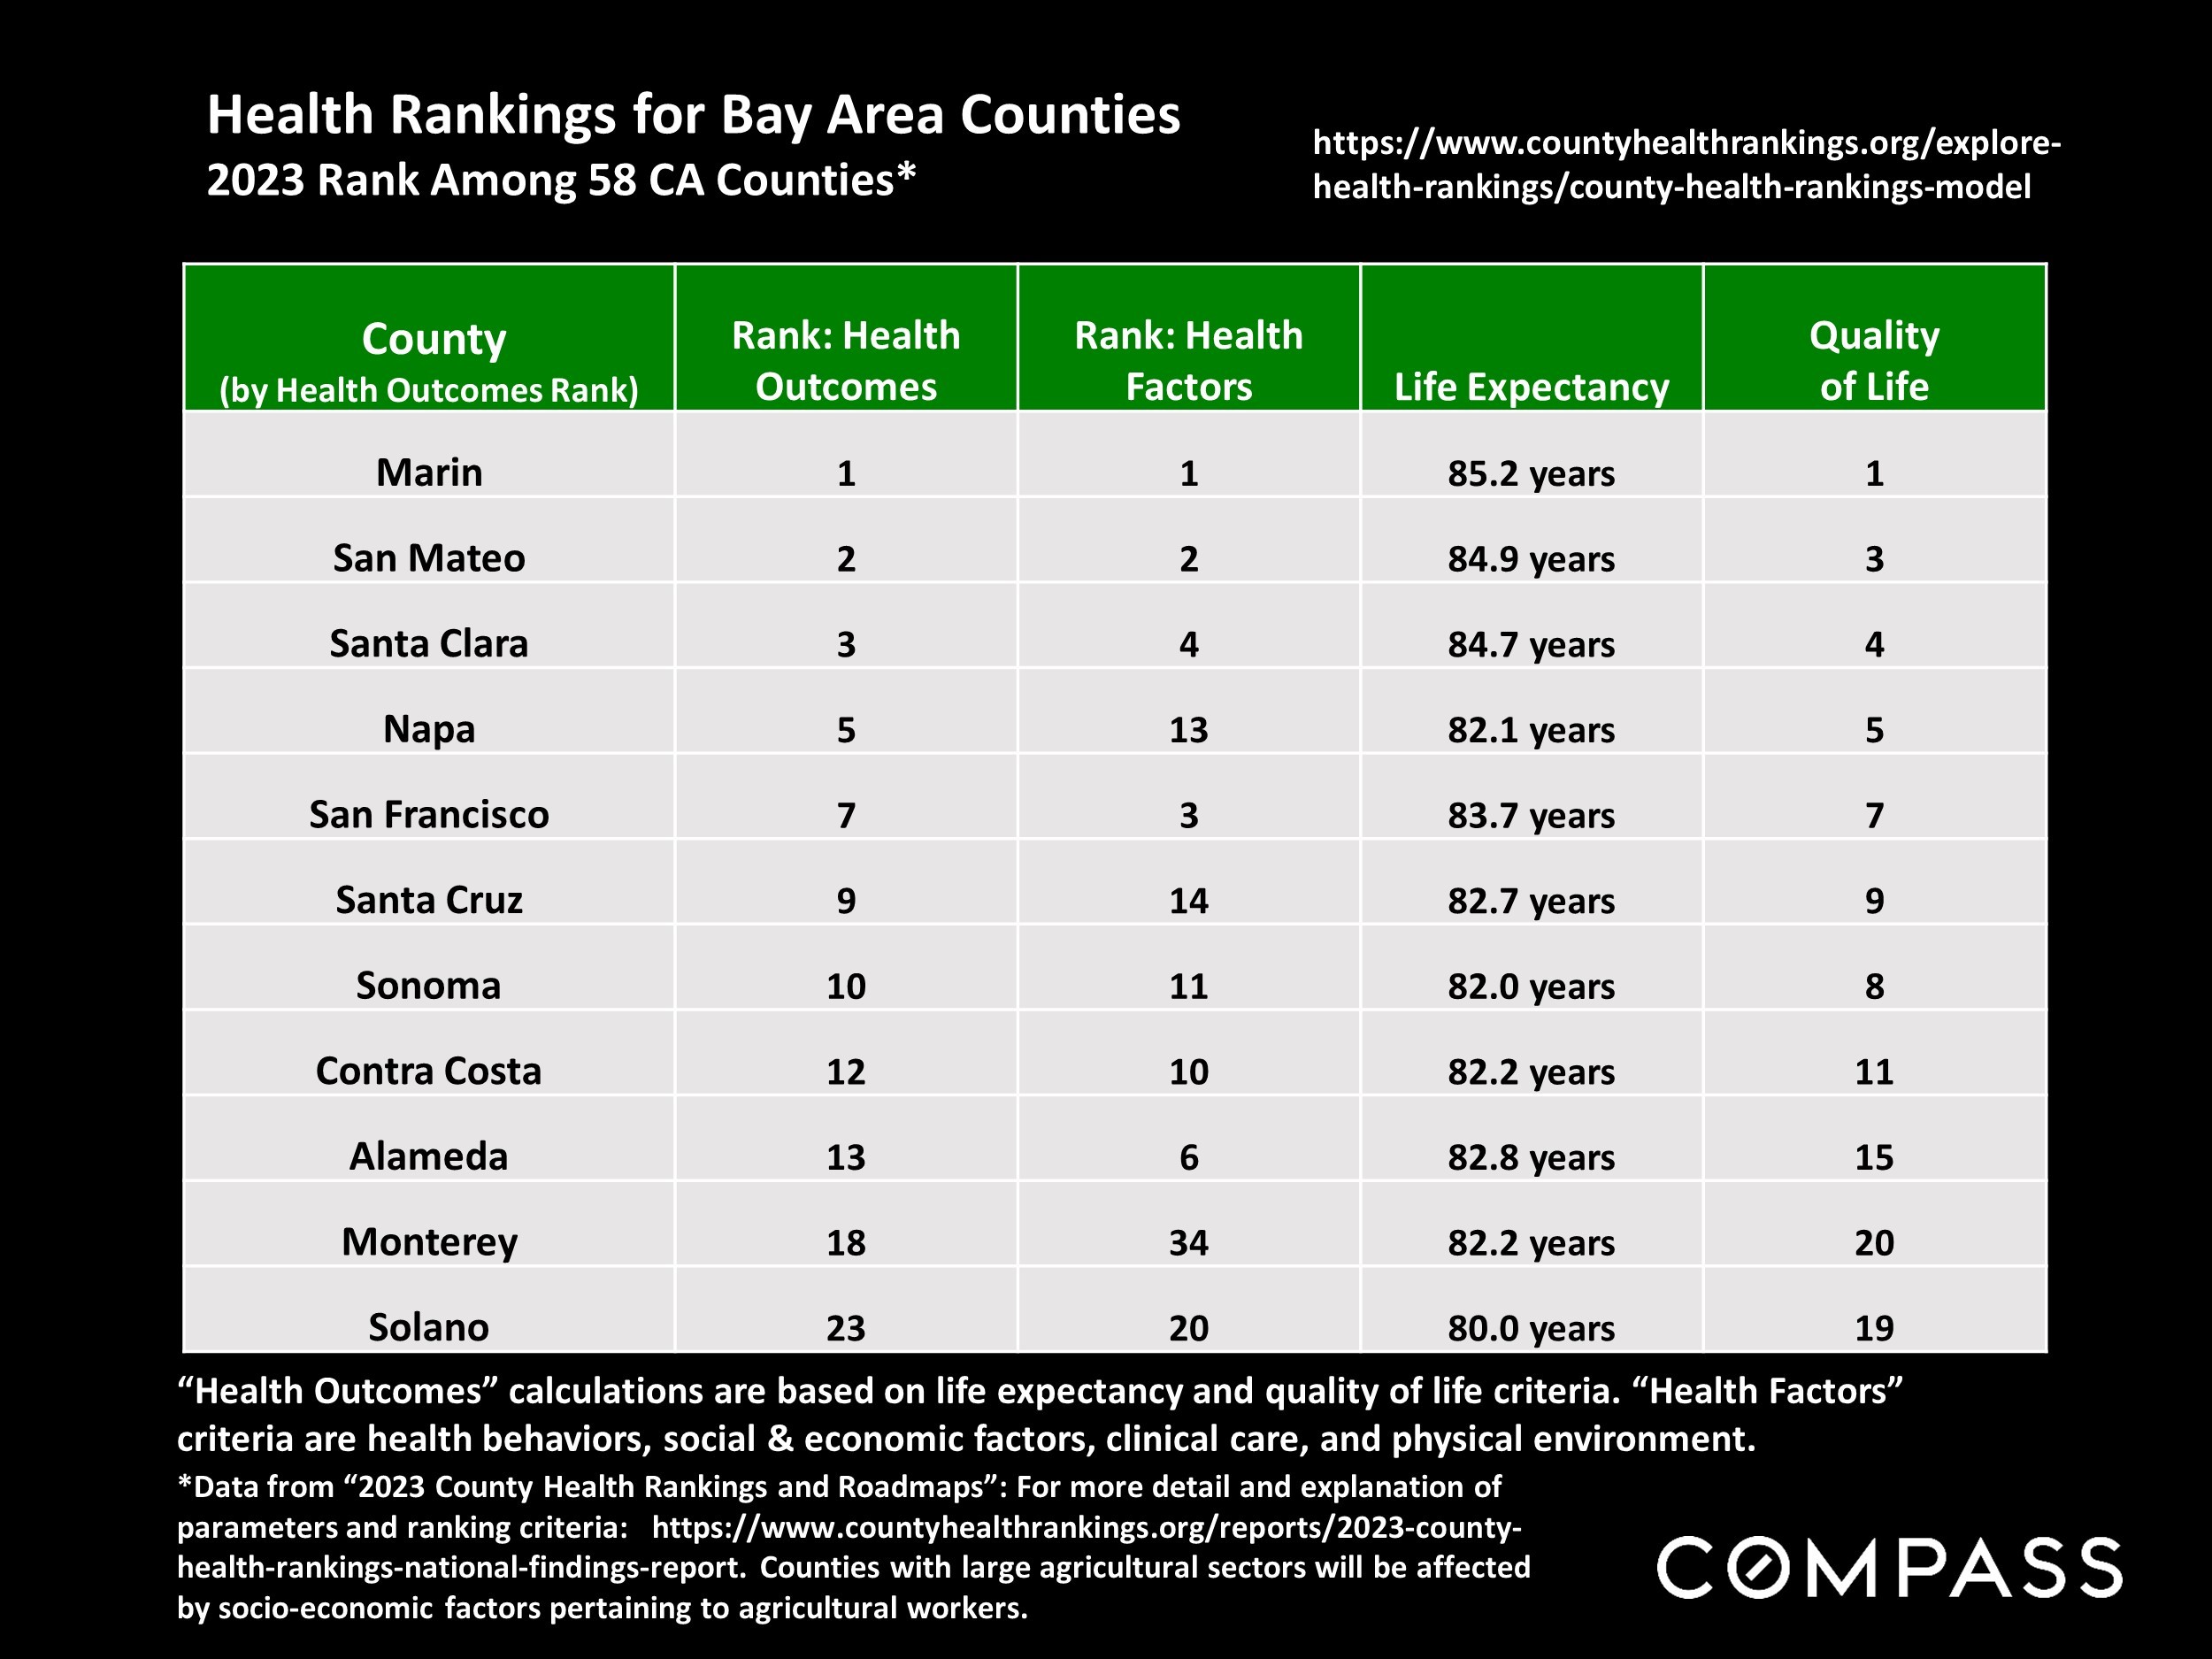 Health Rankings for Bay Area Counties 2023 Rank Among 58 CA Counties*